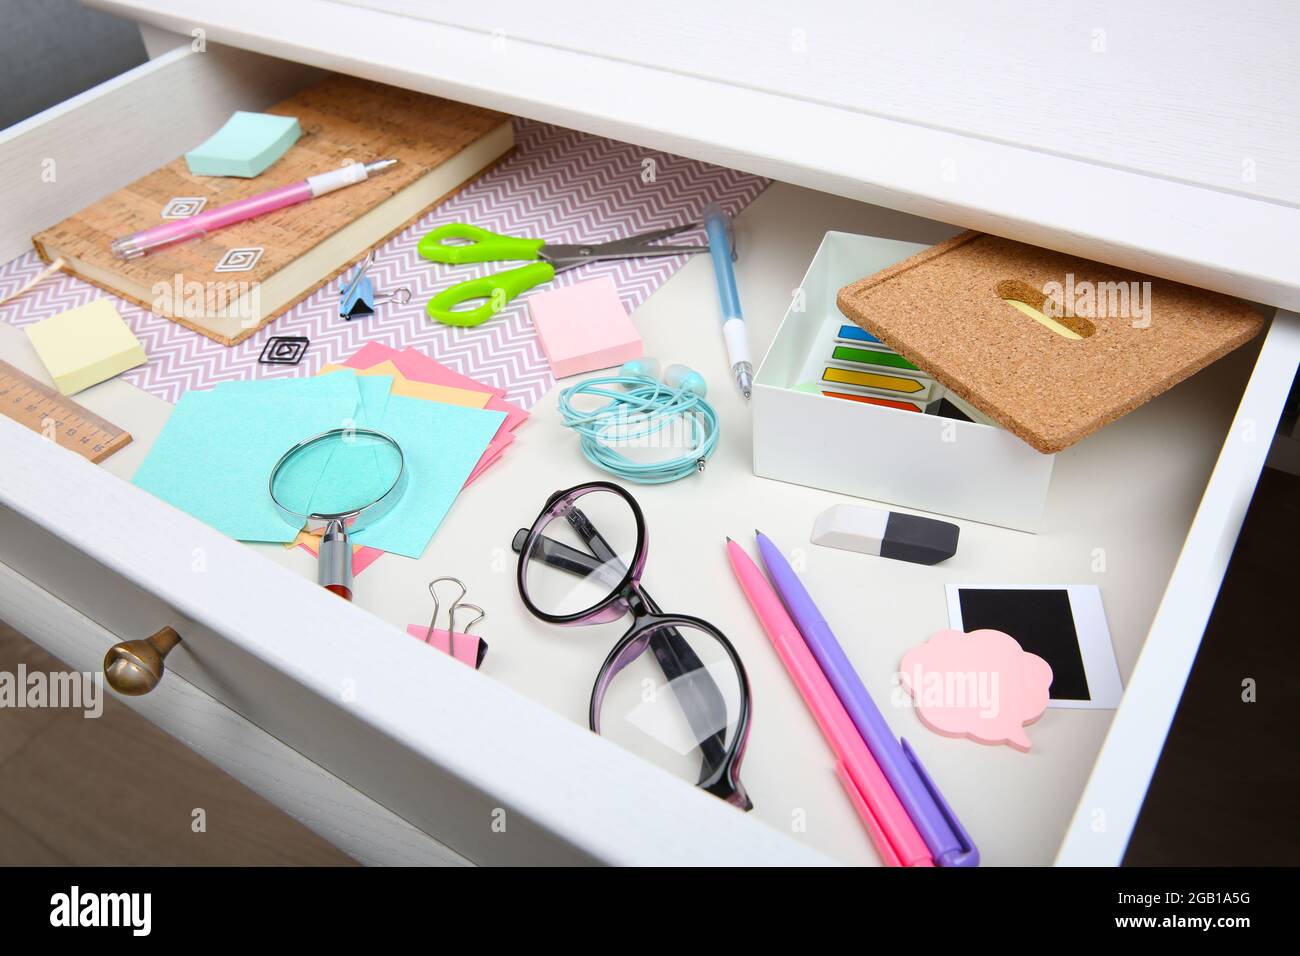 Stationery in open desk drawer closeup Stock Photo